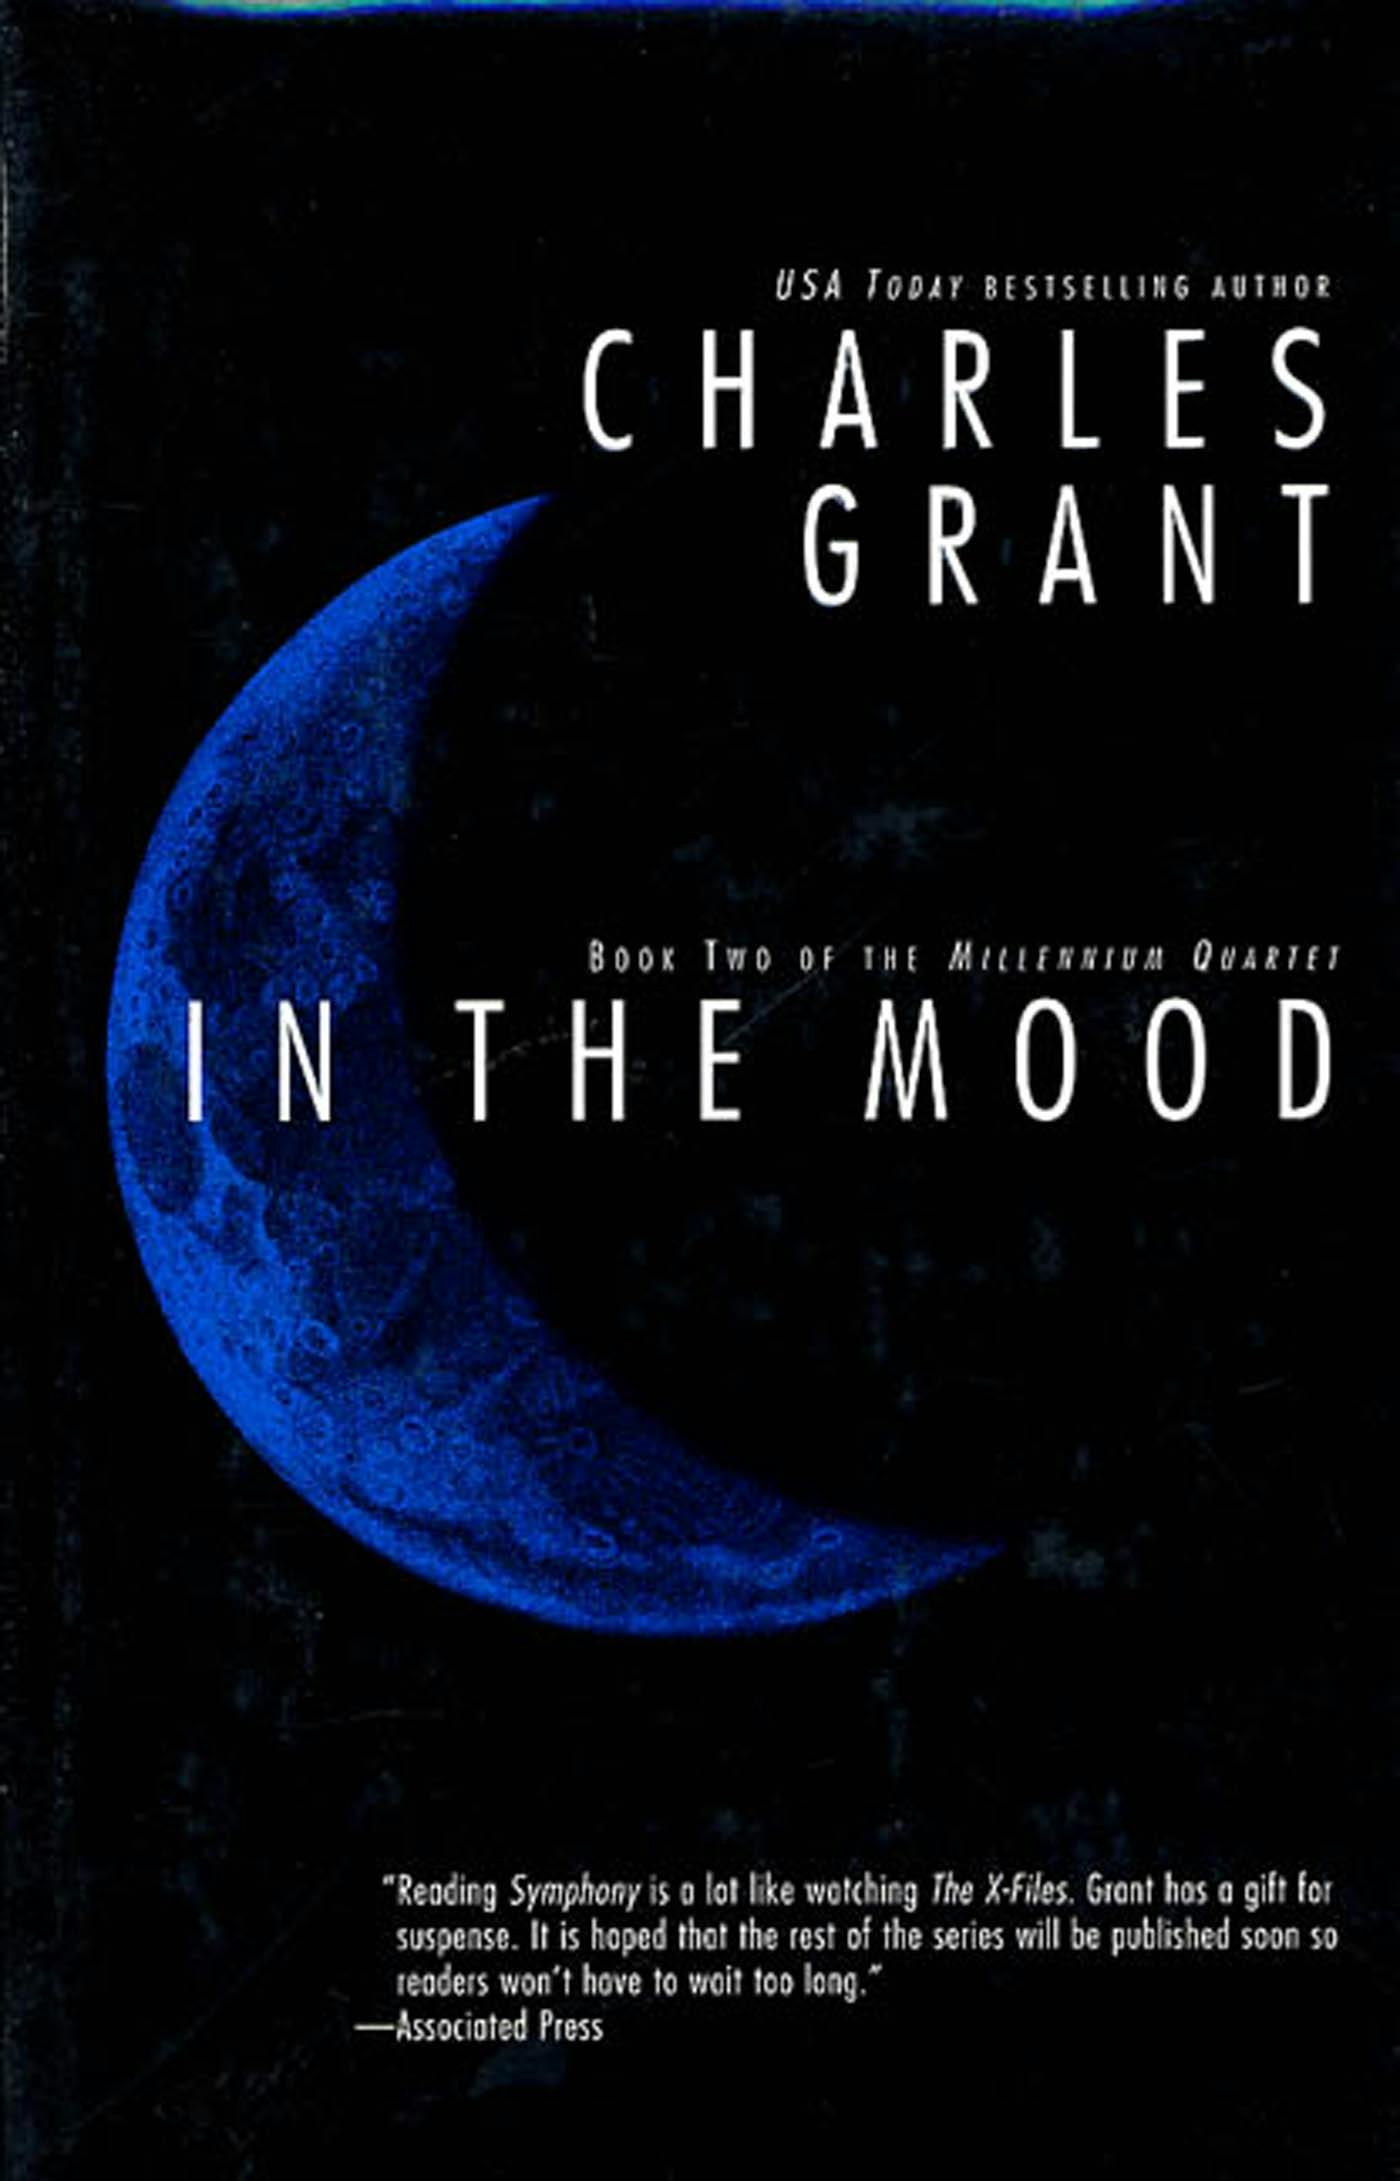 Cover for the book titled as: In The Mood